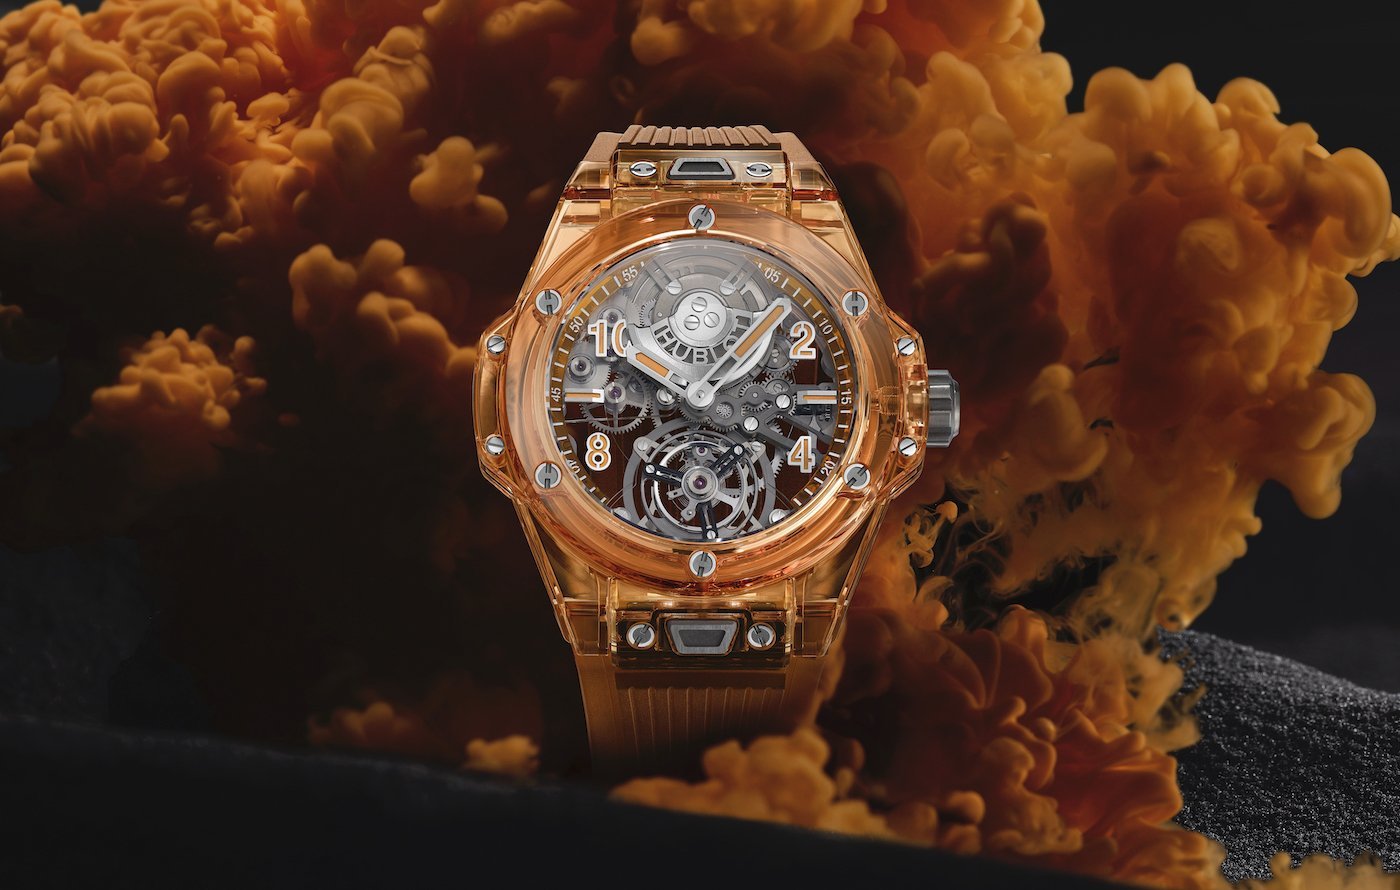 Bulgari, Zenith, Hublot: an introduction to their 2021 releases